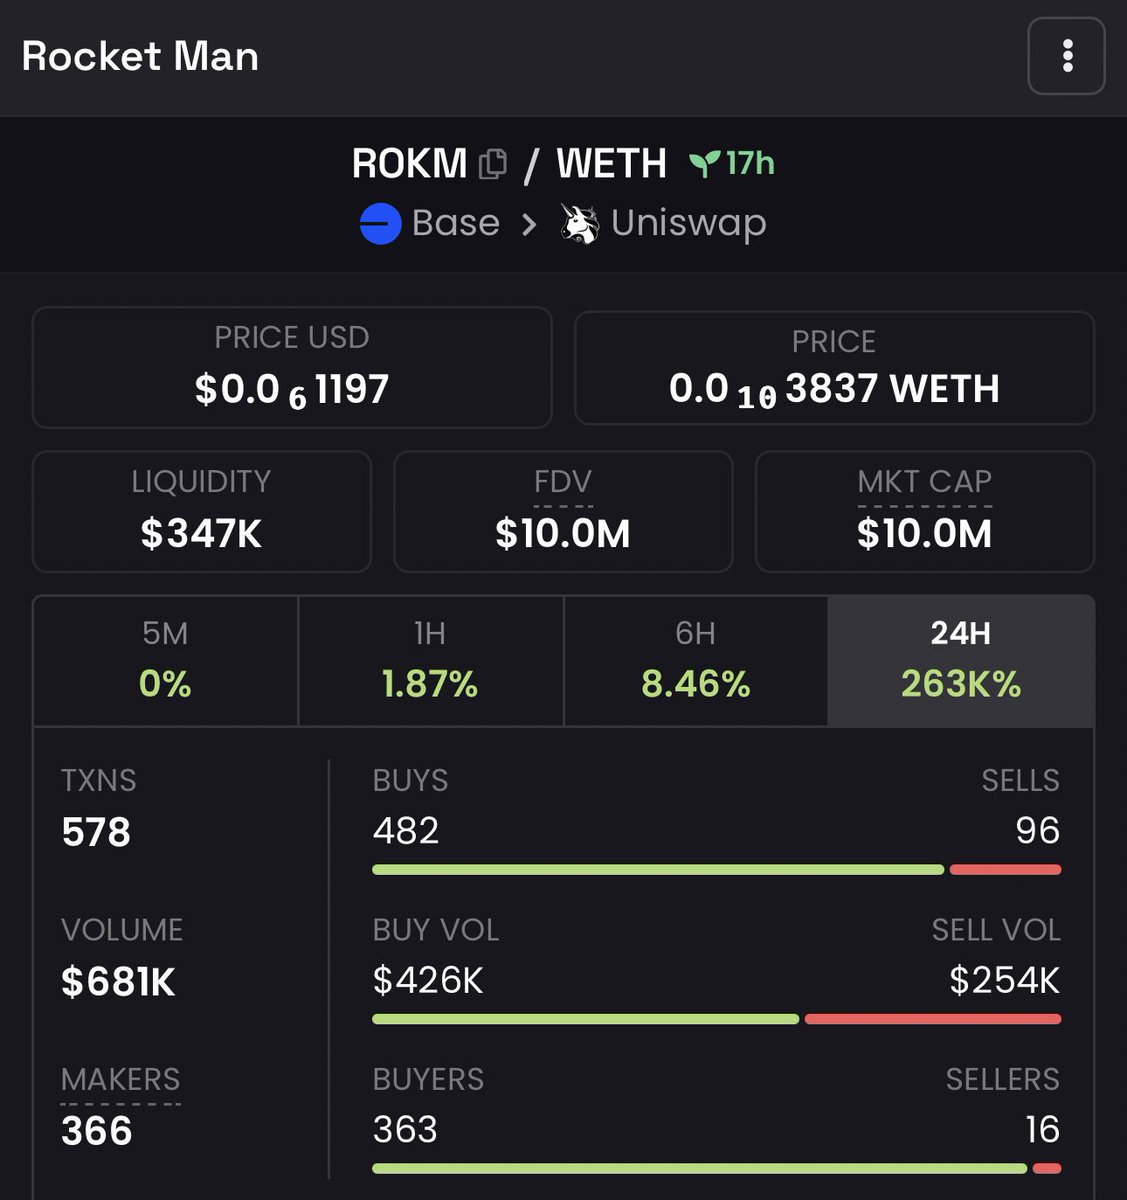 BREAKING: The notorious Rocket Man just launched ROKM-69 on @base chain and it’s soaring—up 2,500x since 14:20 UTC! Born under the moon’s shadow and ruling from Pongyang, Rocket Man’s $ROKM is THE currency. Hurry and go catch that ROKET before it reaches the moon! Dex:…